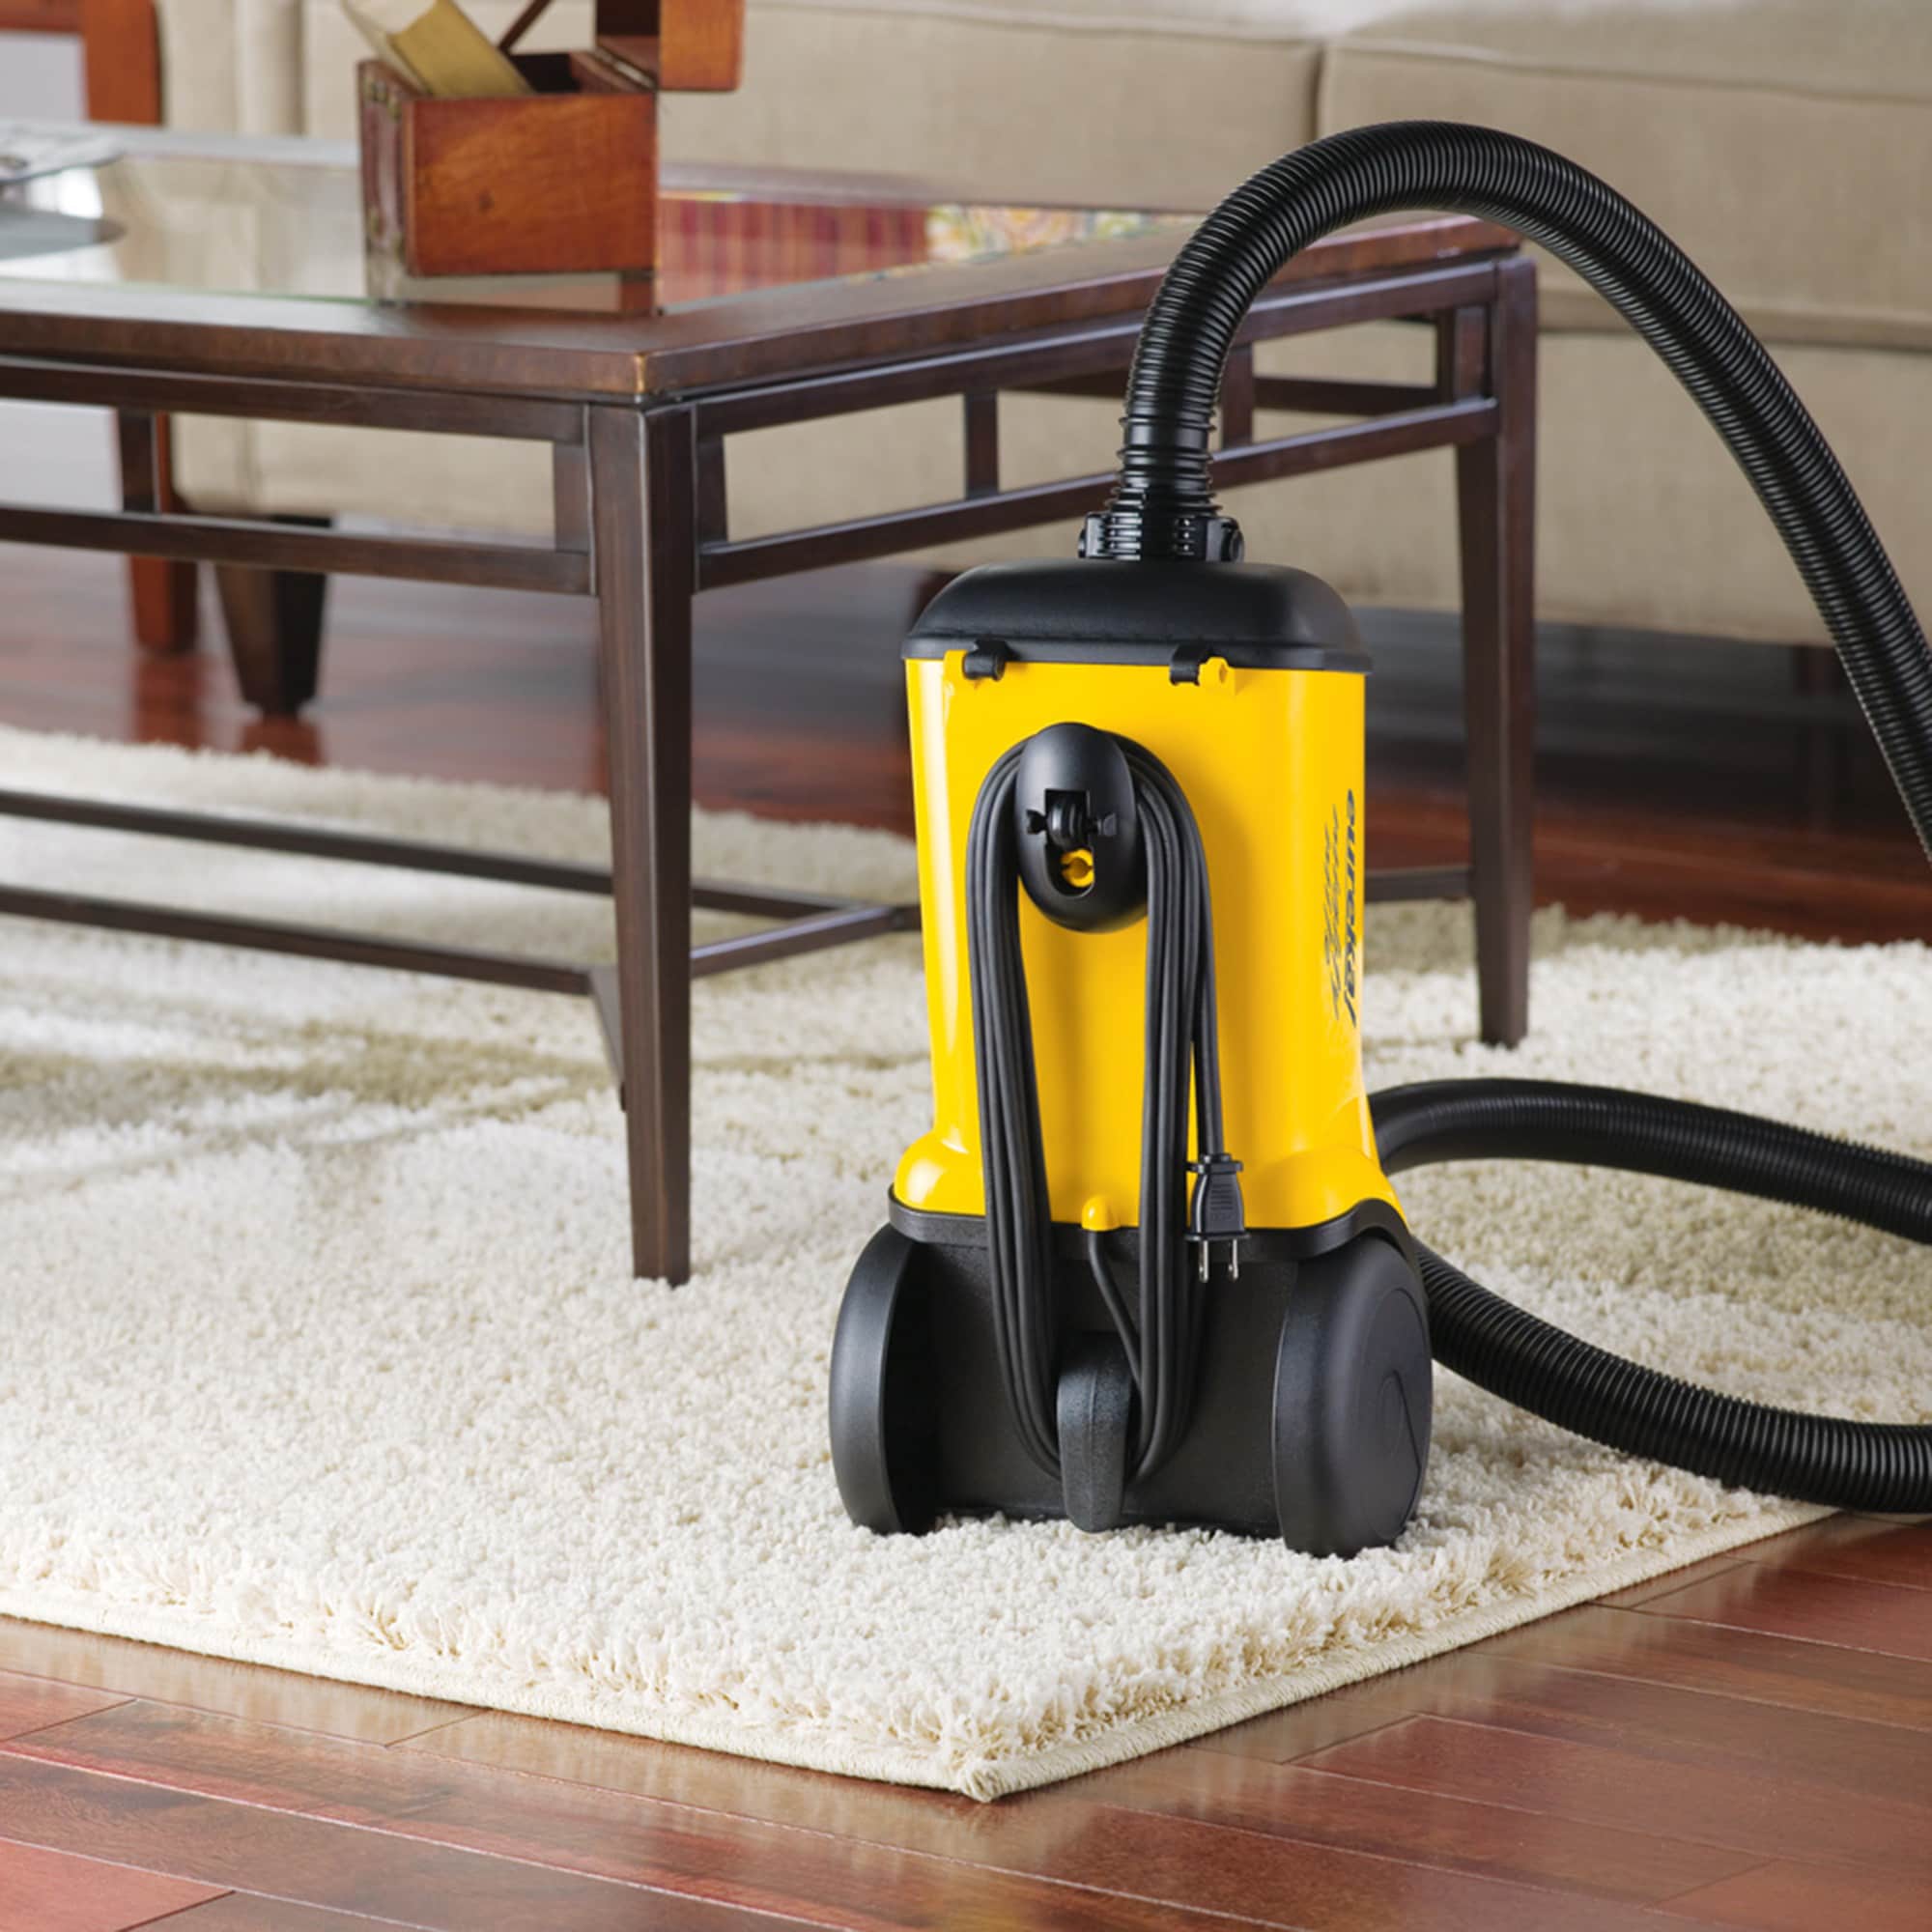 Eureka Canister Vacuum Vac Cleaner Mighty Mite Lightweight Corded Floor Portable 